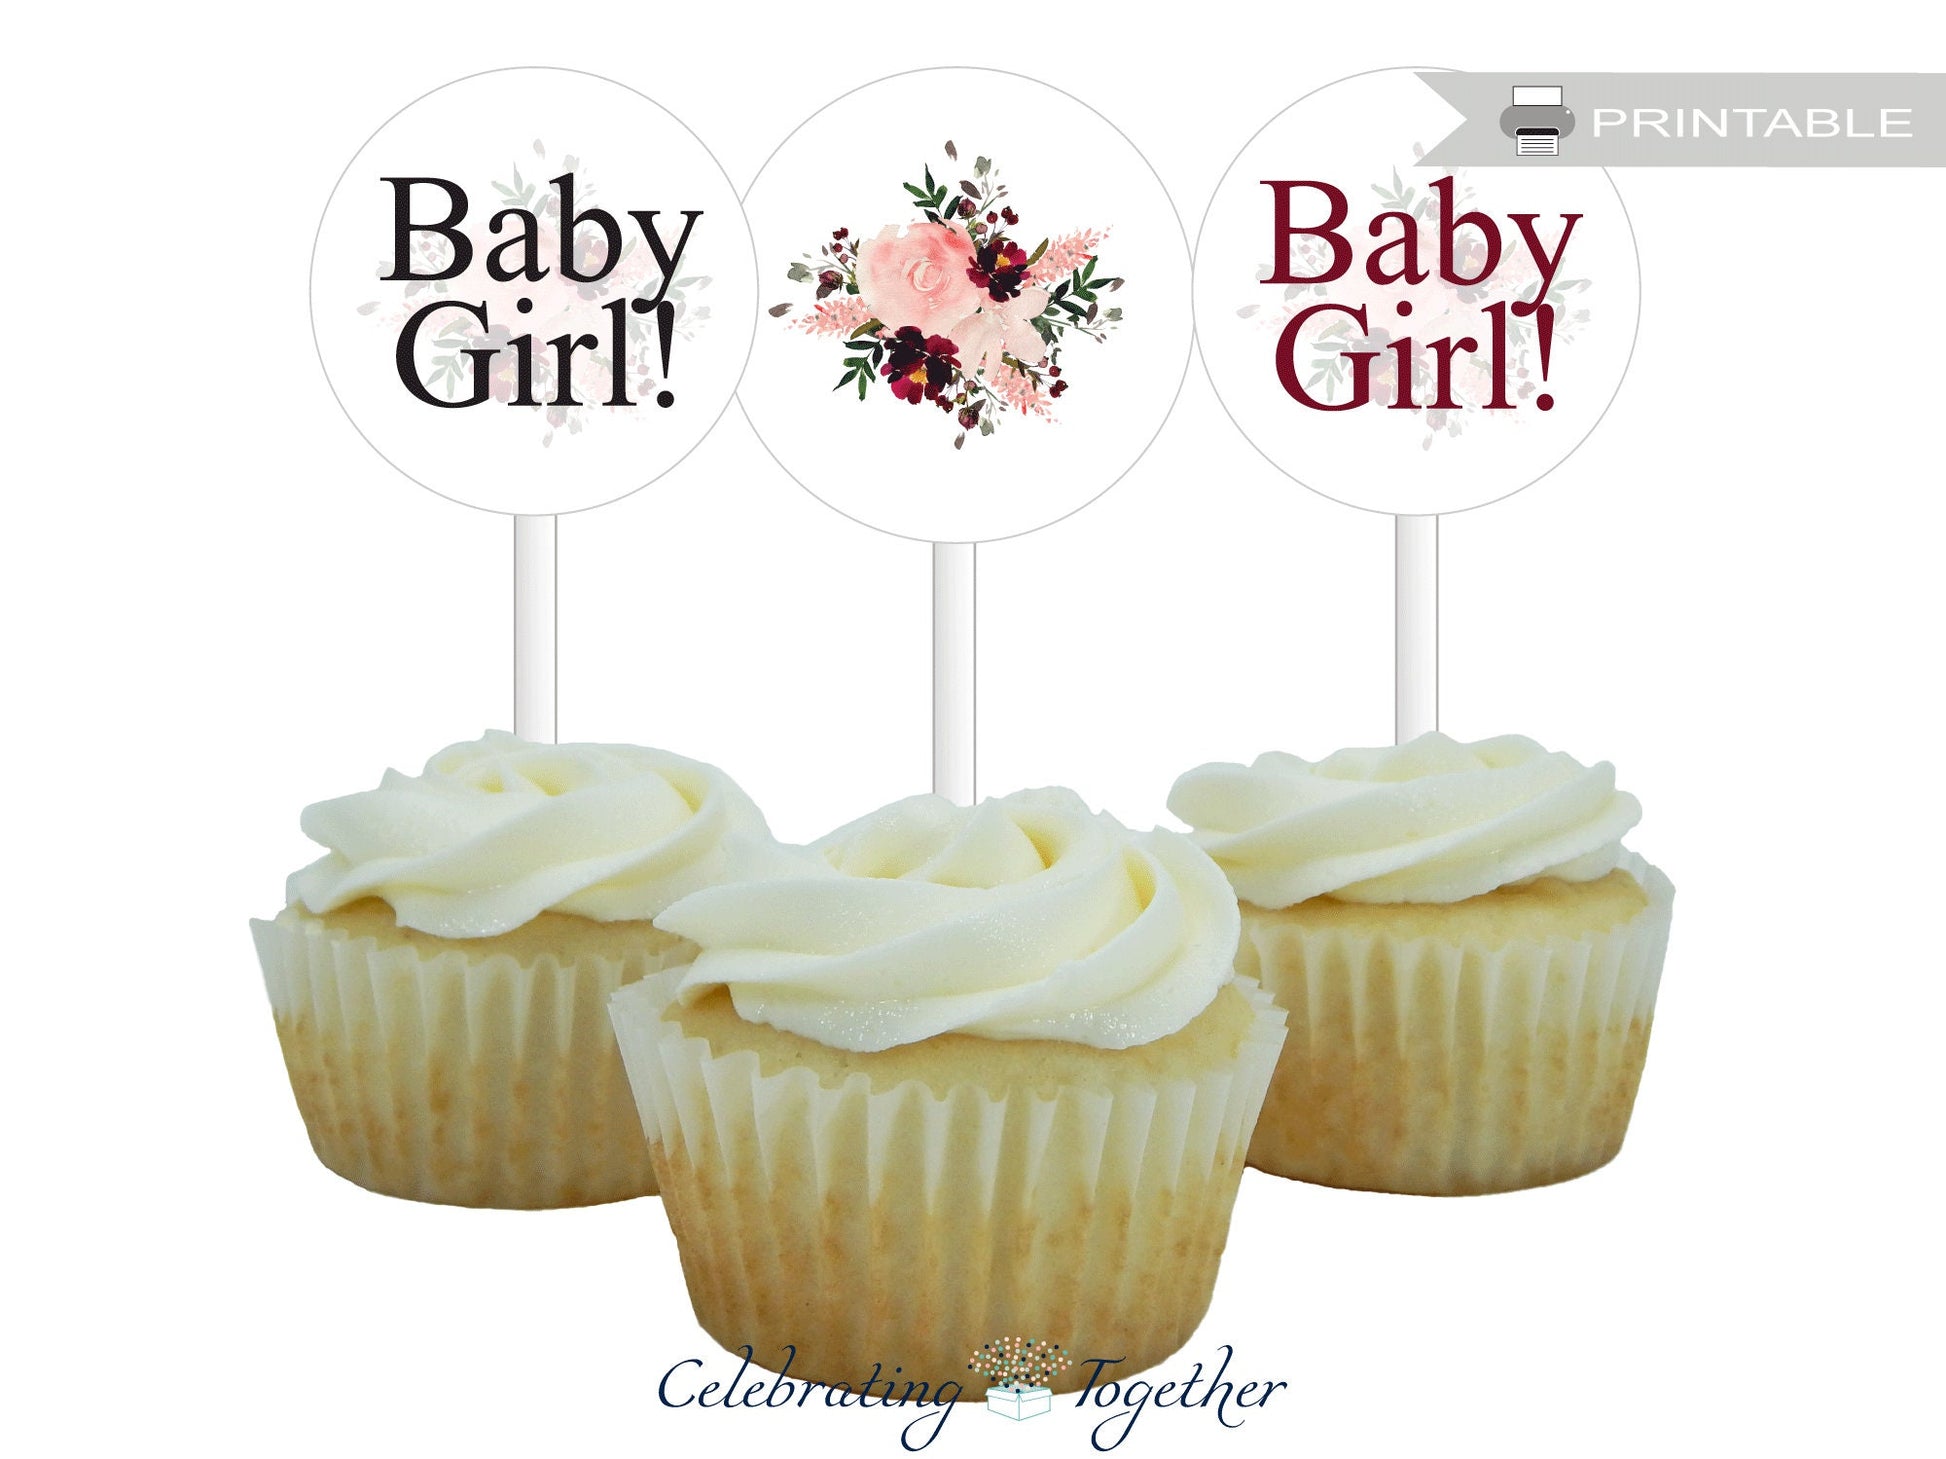 Printable baby girl cupcake toppers - floral cupcake toppers